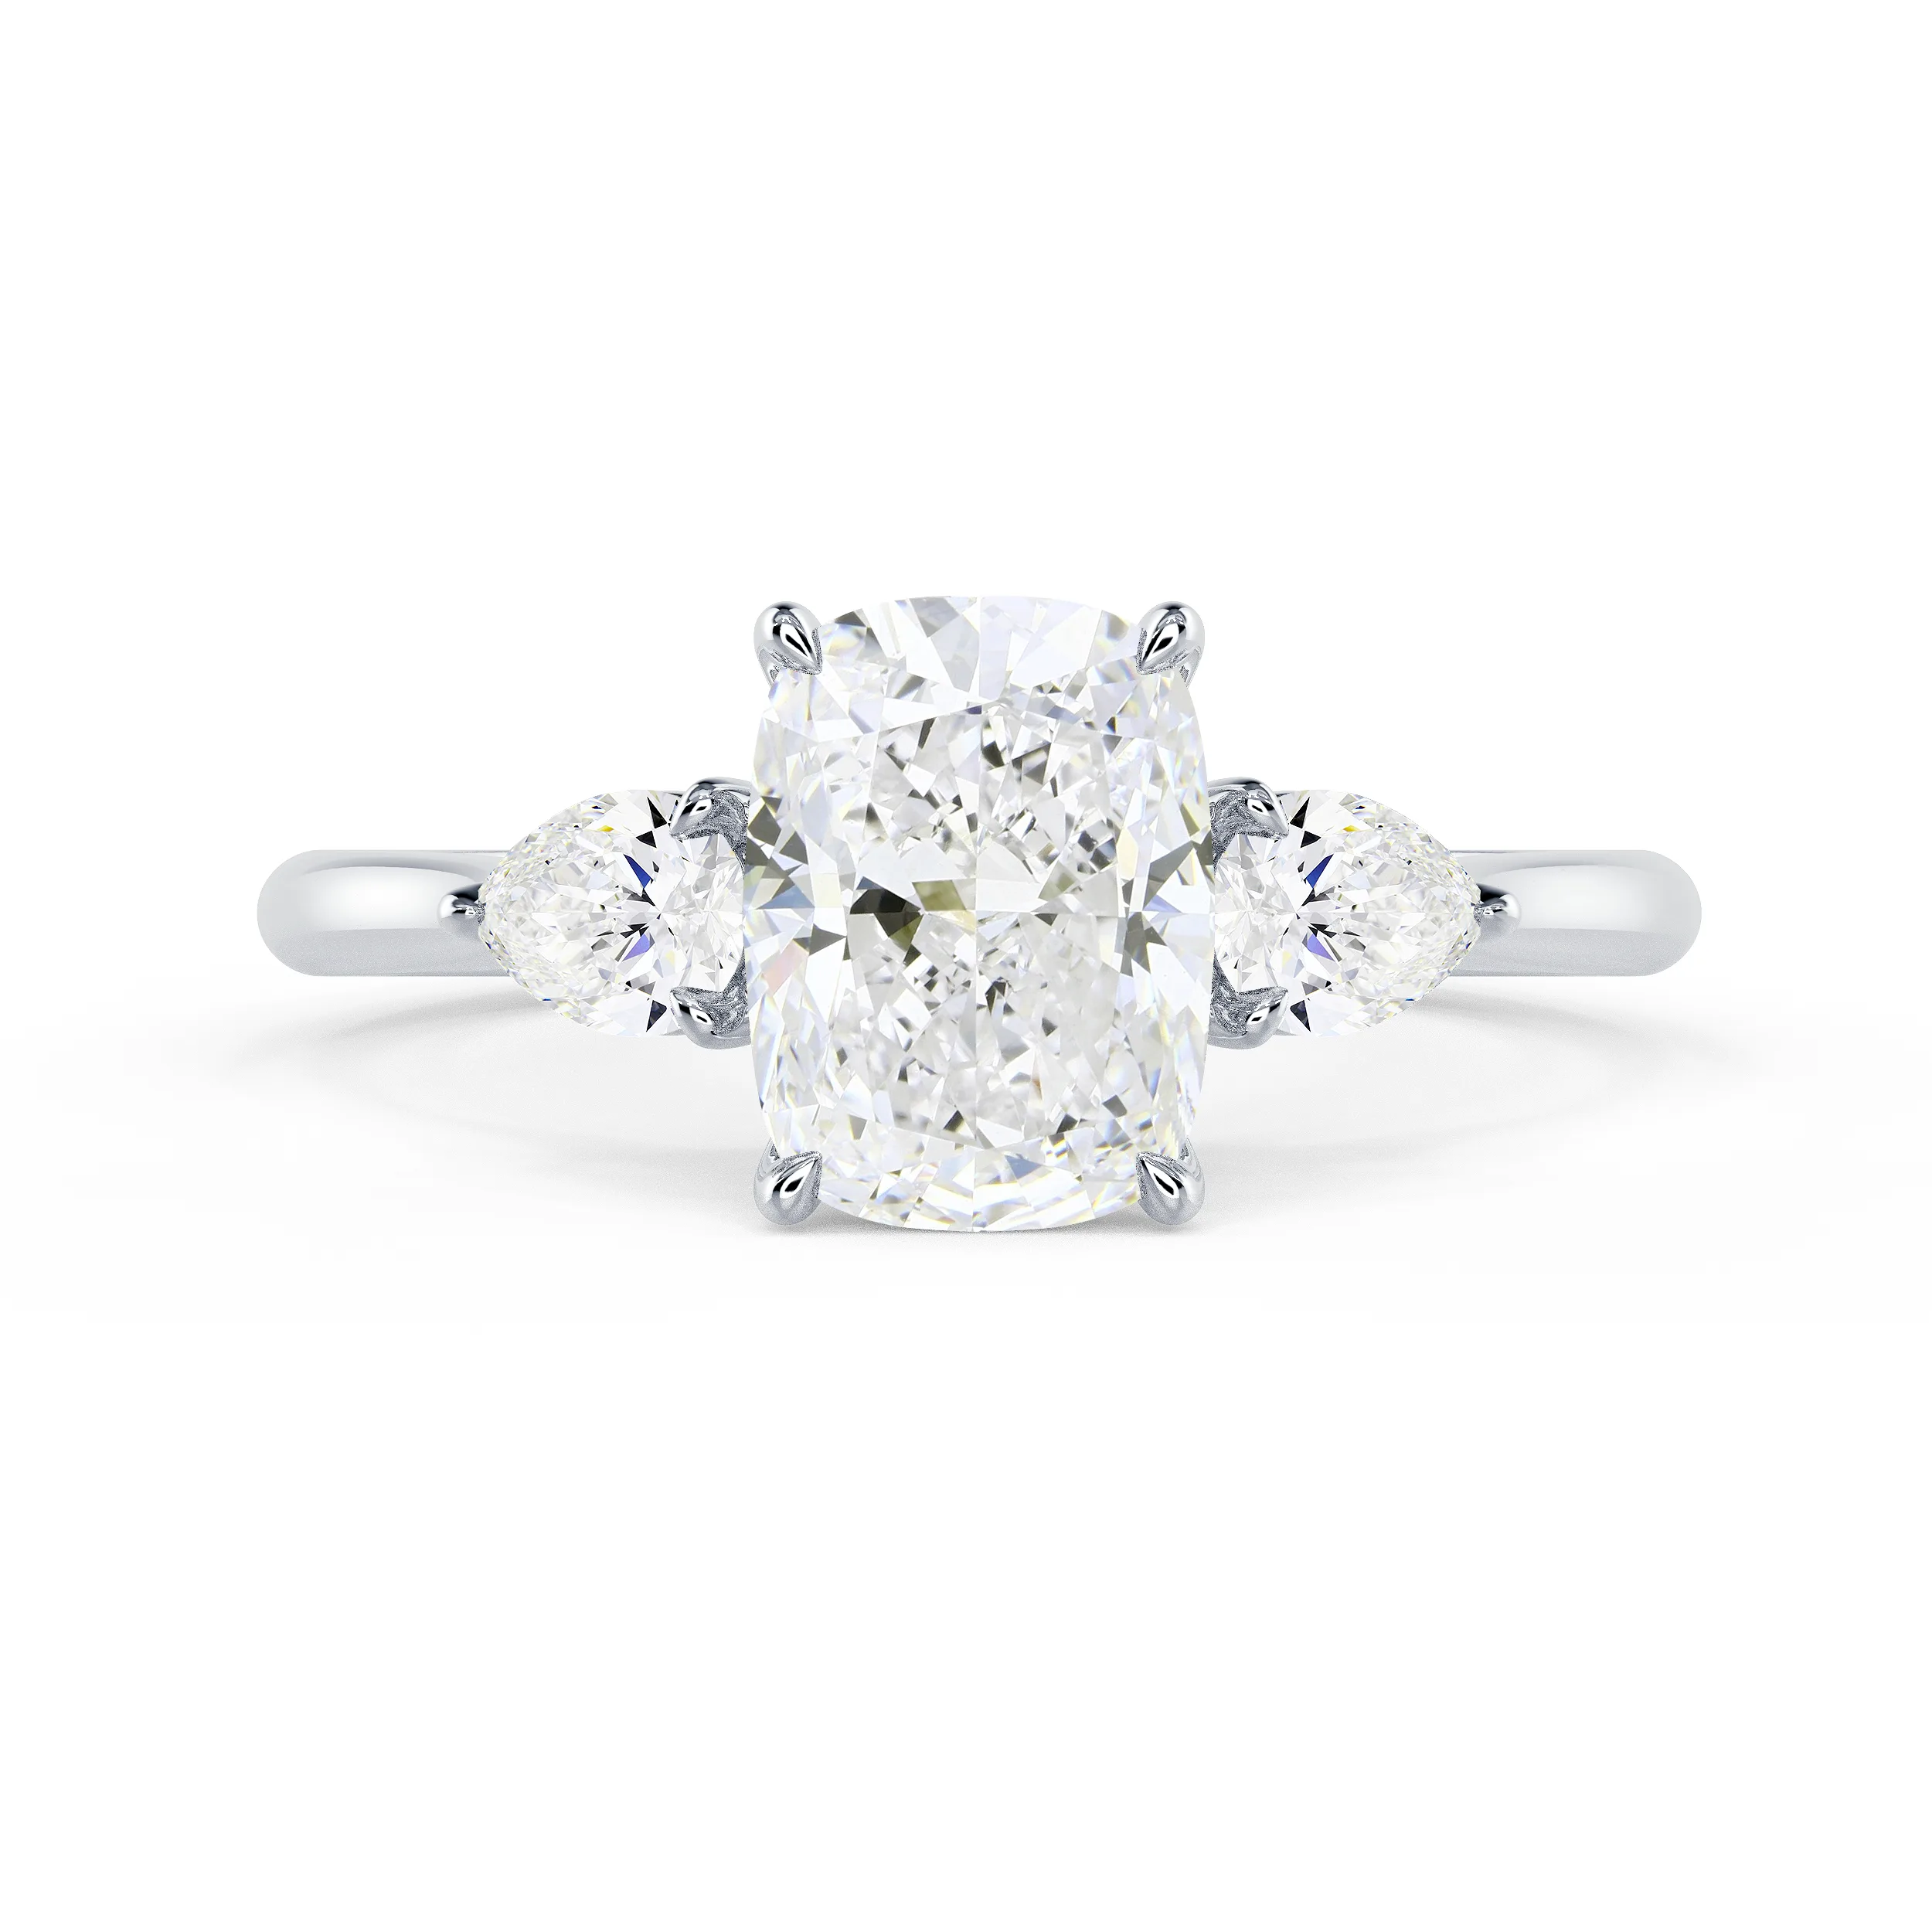 White Gold Cushion and Pear Setting featuring Hand Selected Diamonds (Main View)